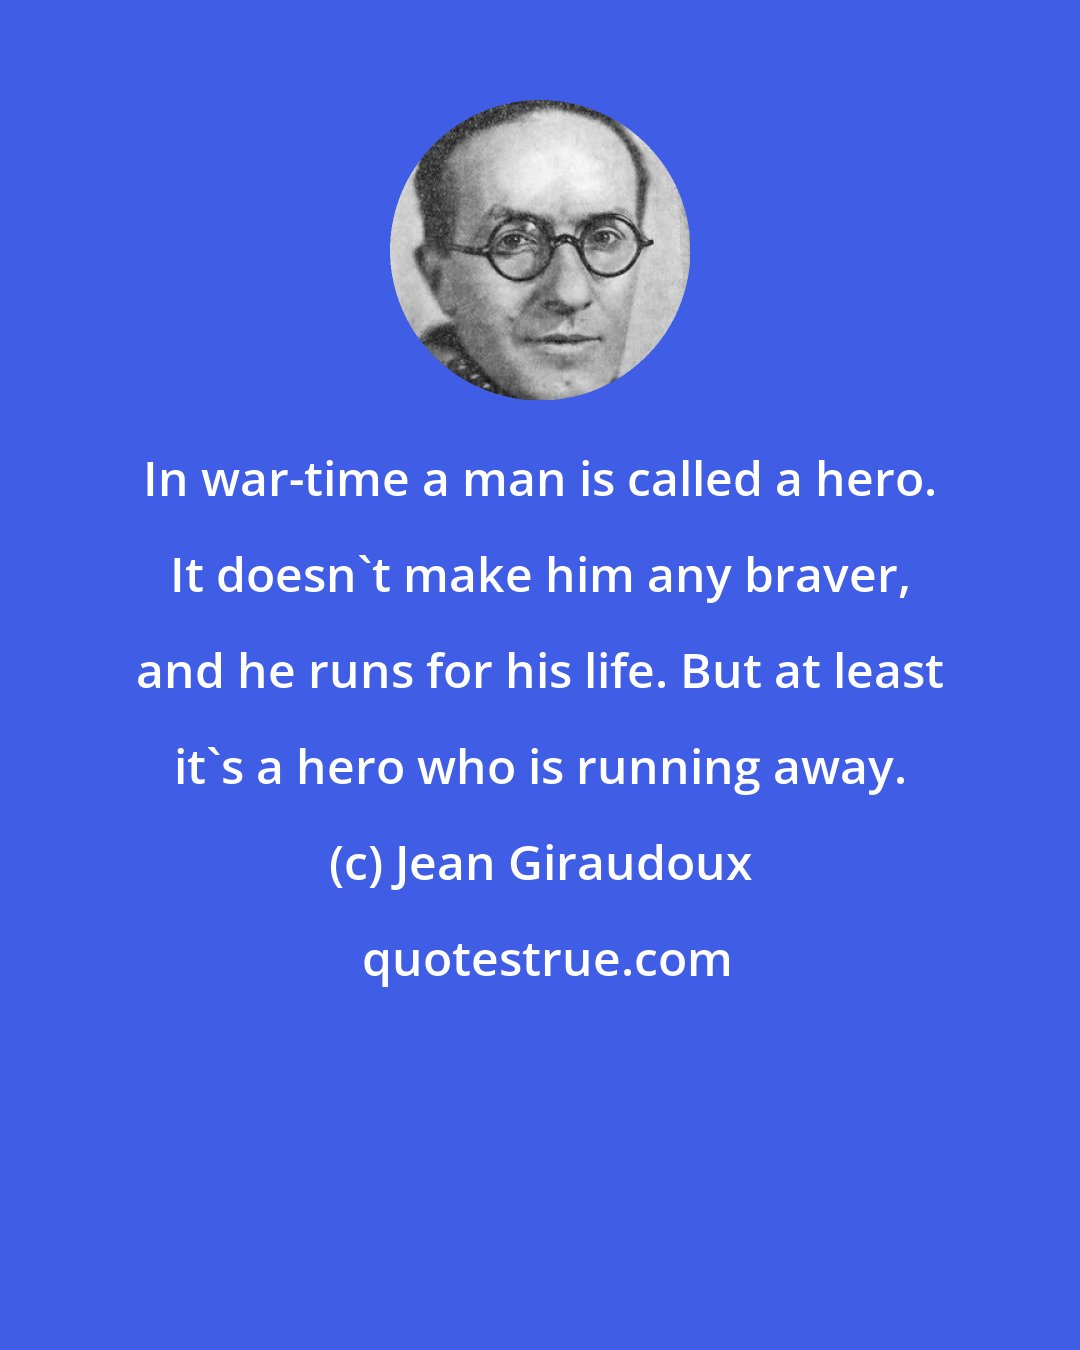 Jean Giraudoux: In war-time a man is called a hero. It doesn't make him any braver, and he runs for his life. But at least it's a hero who is running away.